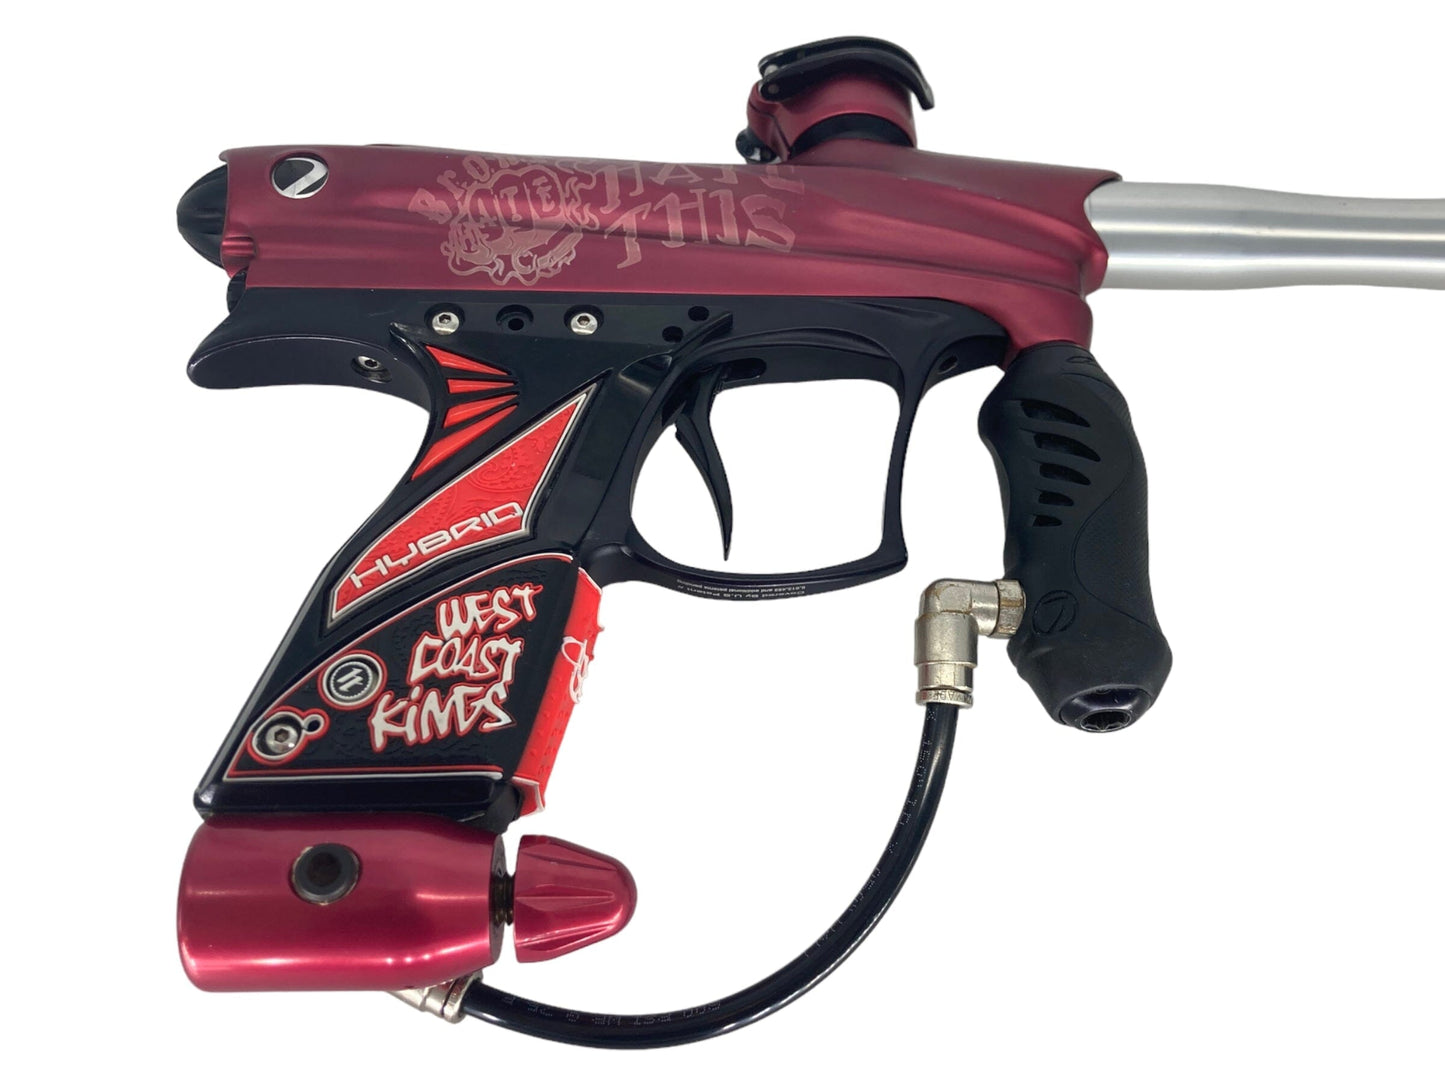 Used Dye Dm 9 Paintball Gun from CPXBrosPaintball Buy/Sell/Trade Paintball Markers, Paintball Hoppers, Paintball Masks, and Hormesis Headbands